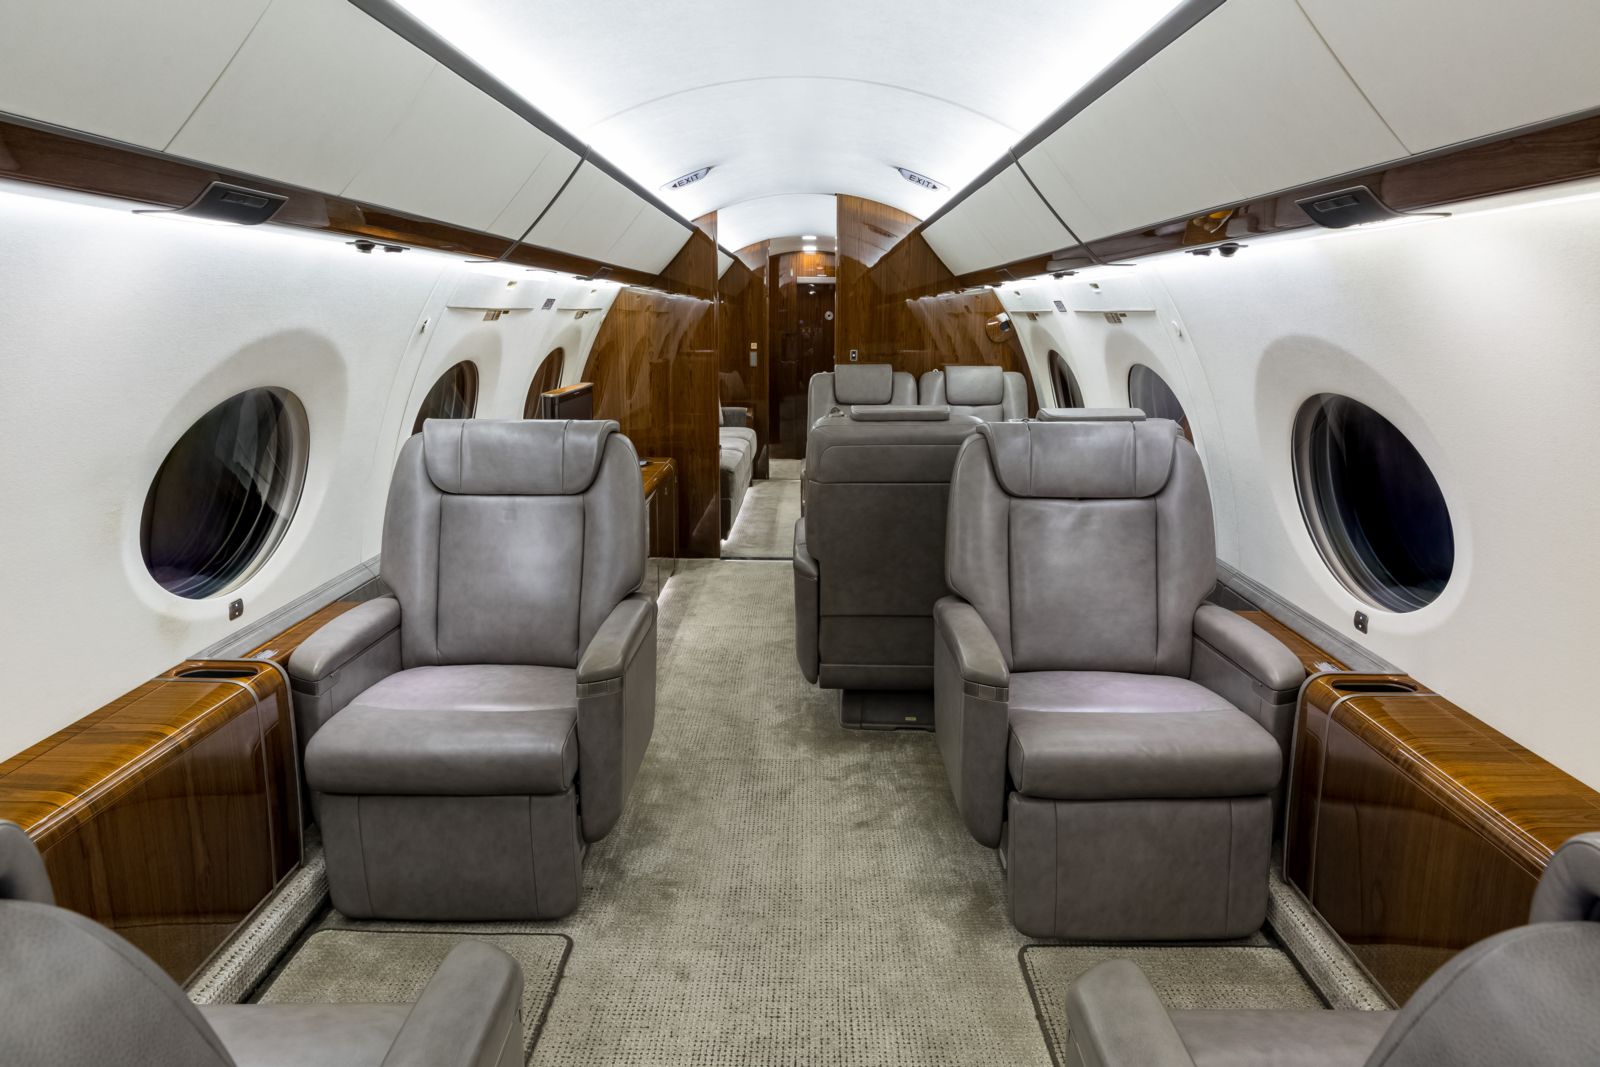 Gulfstream G650  S/N 6003 for sale | gallery image: /userfiles/images/G650_sn6003/bfp_2588.jpg